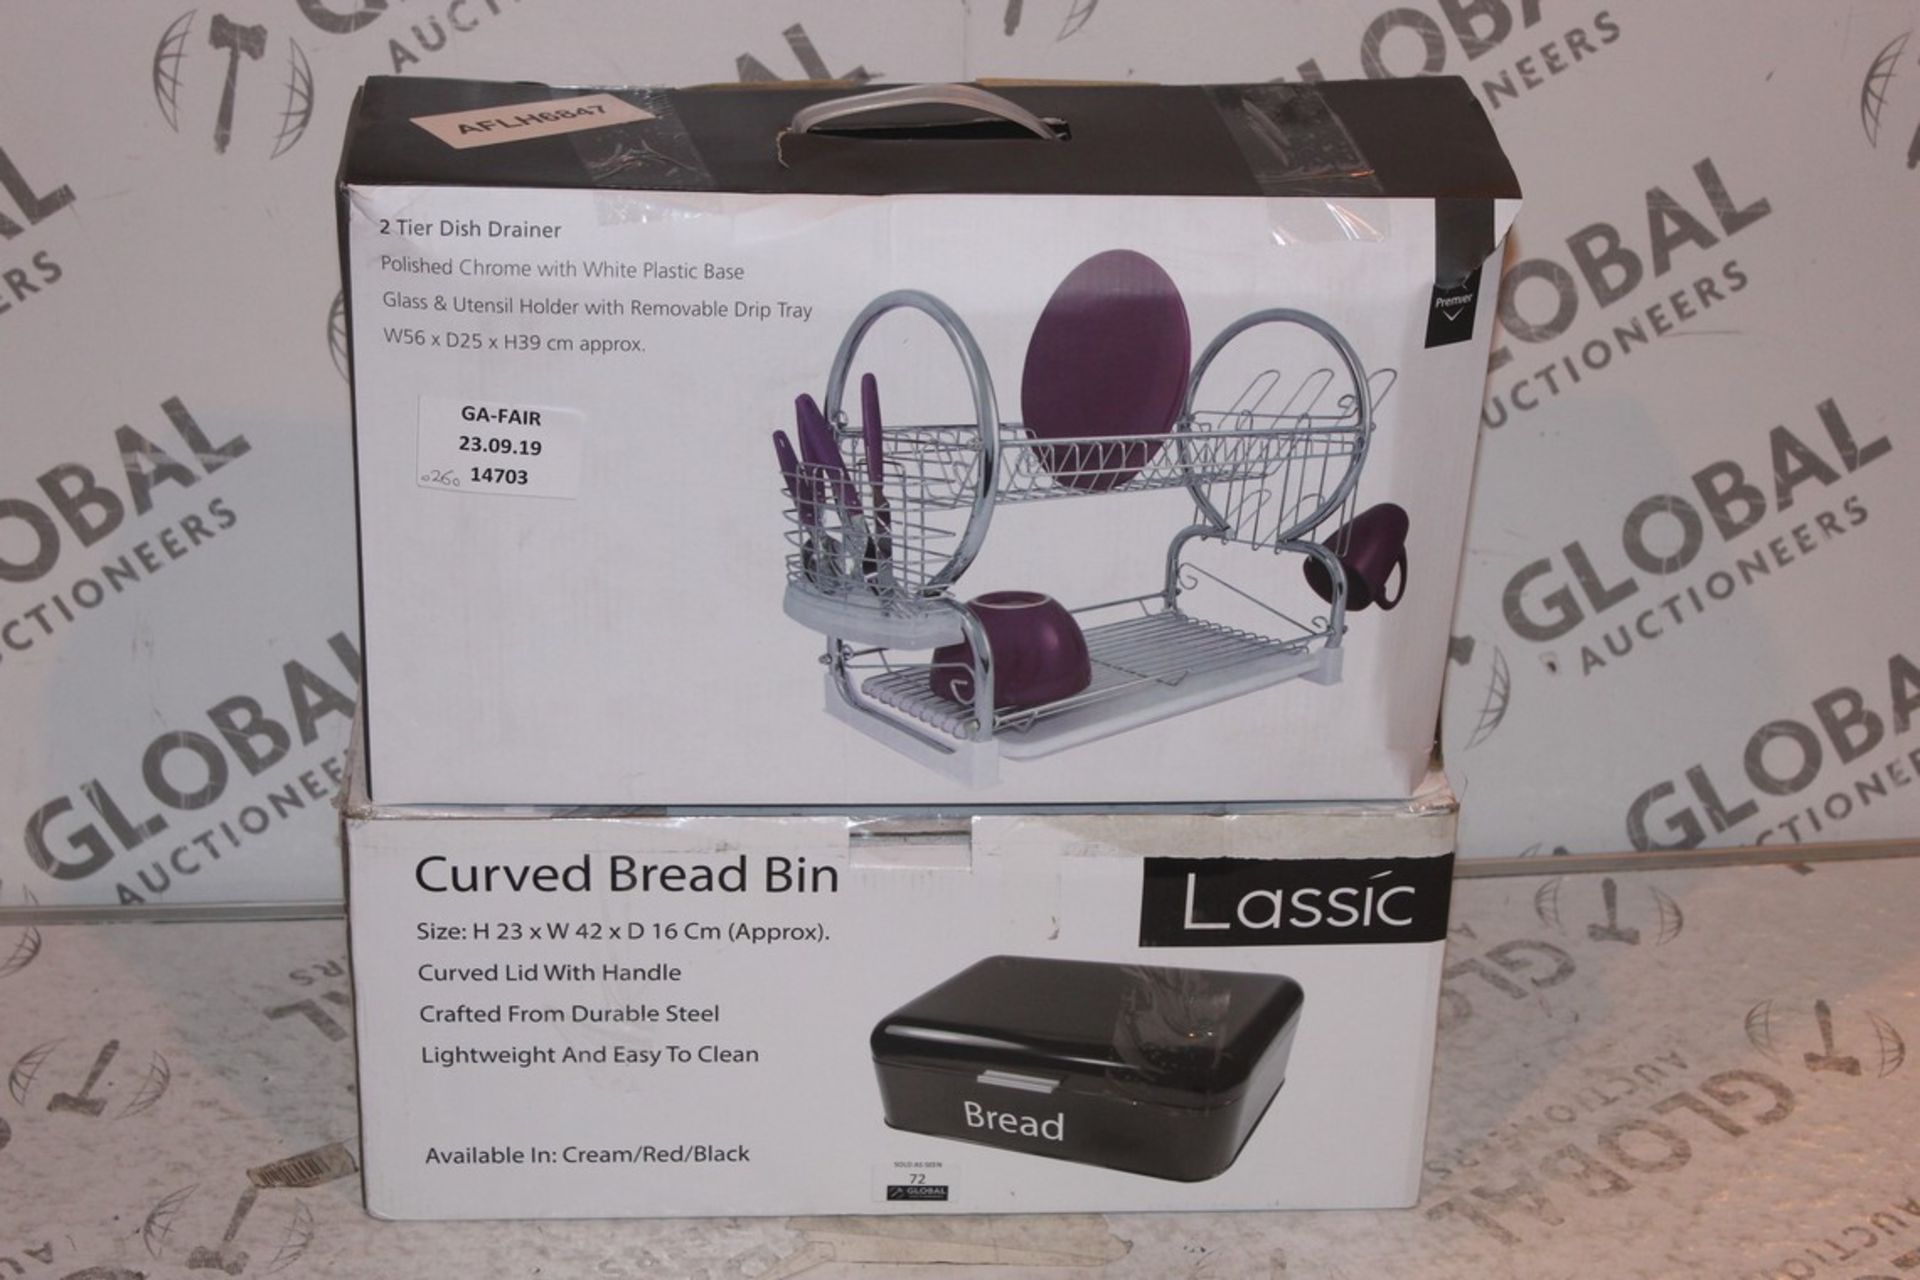 Lot to Contain 2 Boxed Assorted Items to Include a Curved Bread Bin and a 2 Tier Dish Drainer